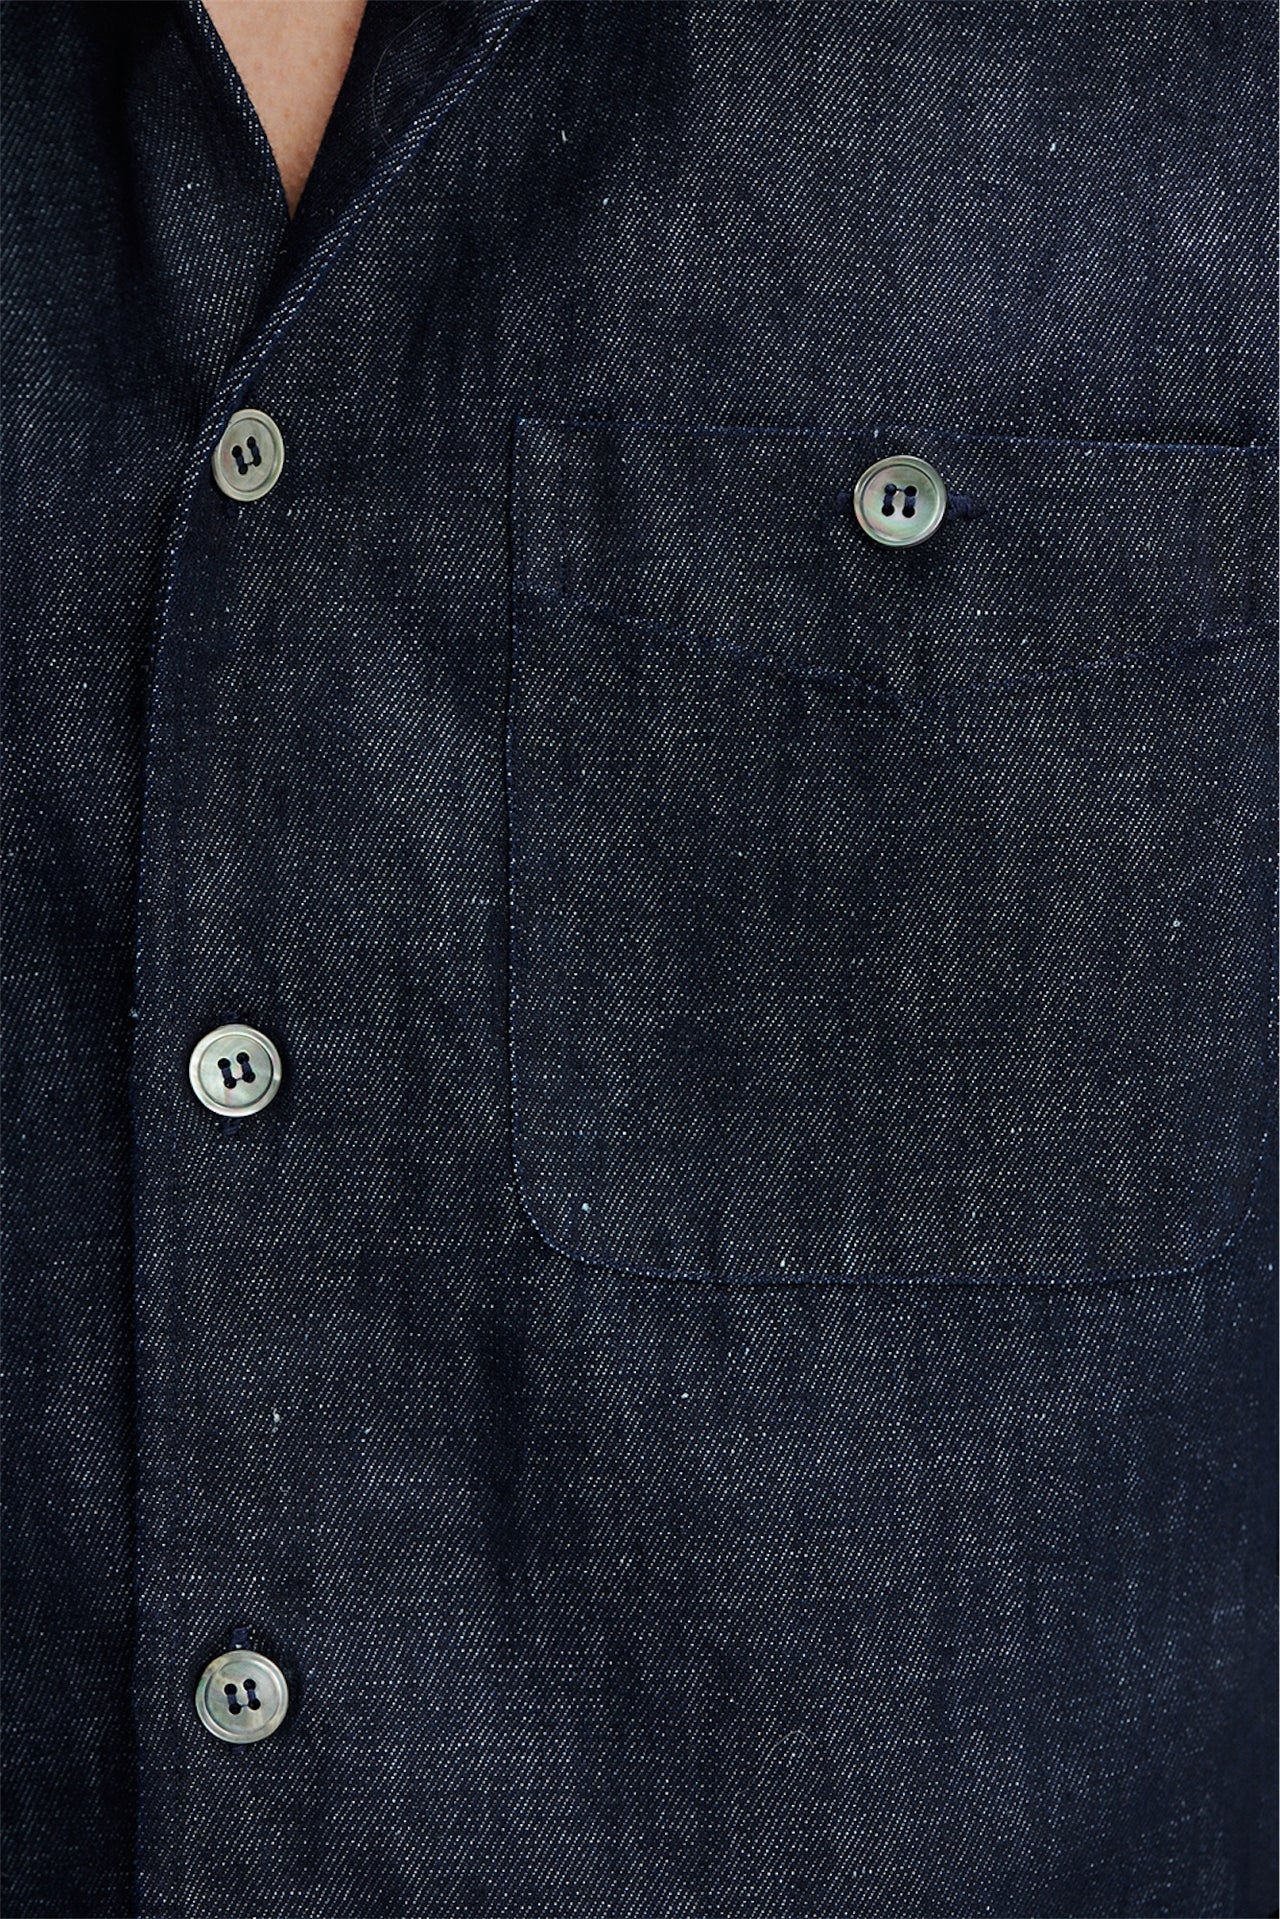 Strong Shirt in a Rinsed Blue Denim Mix of Italian Cotton and Hemp